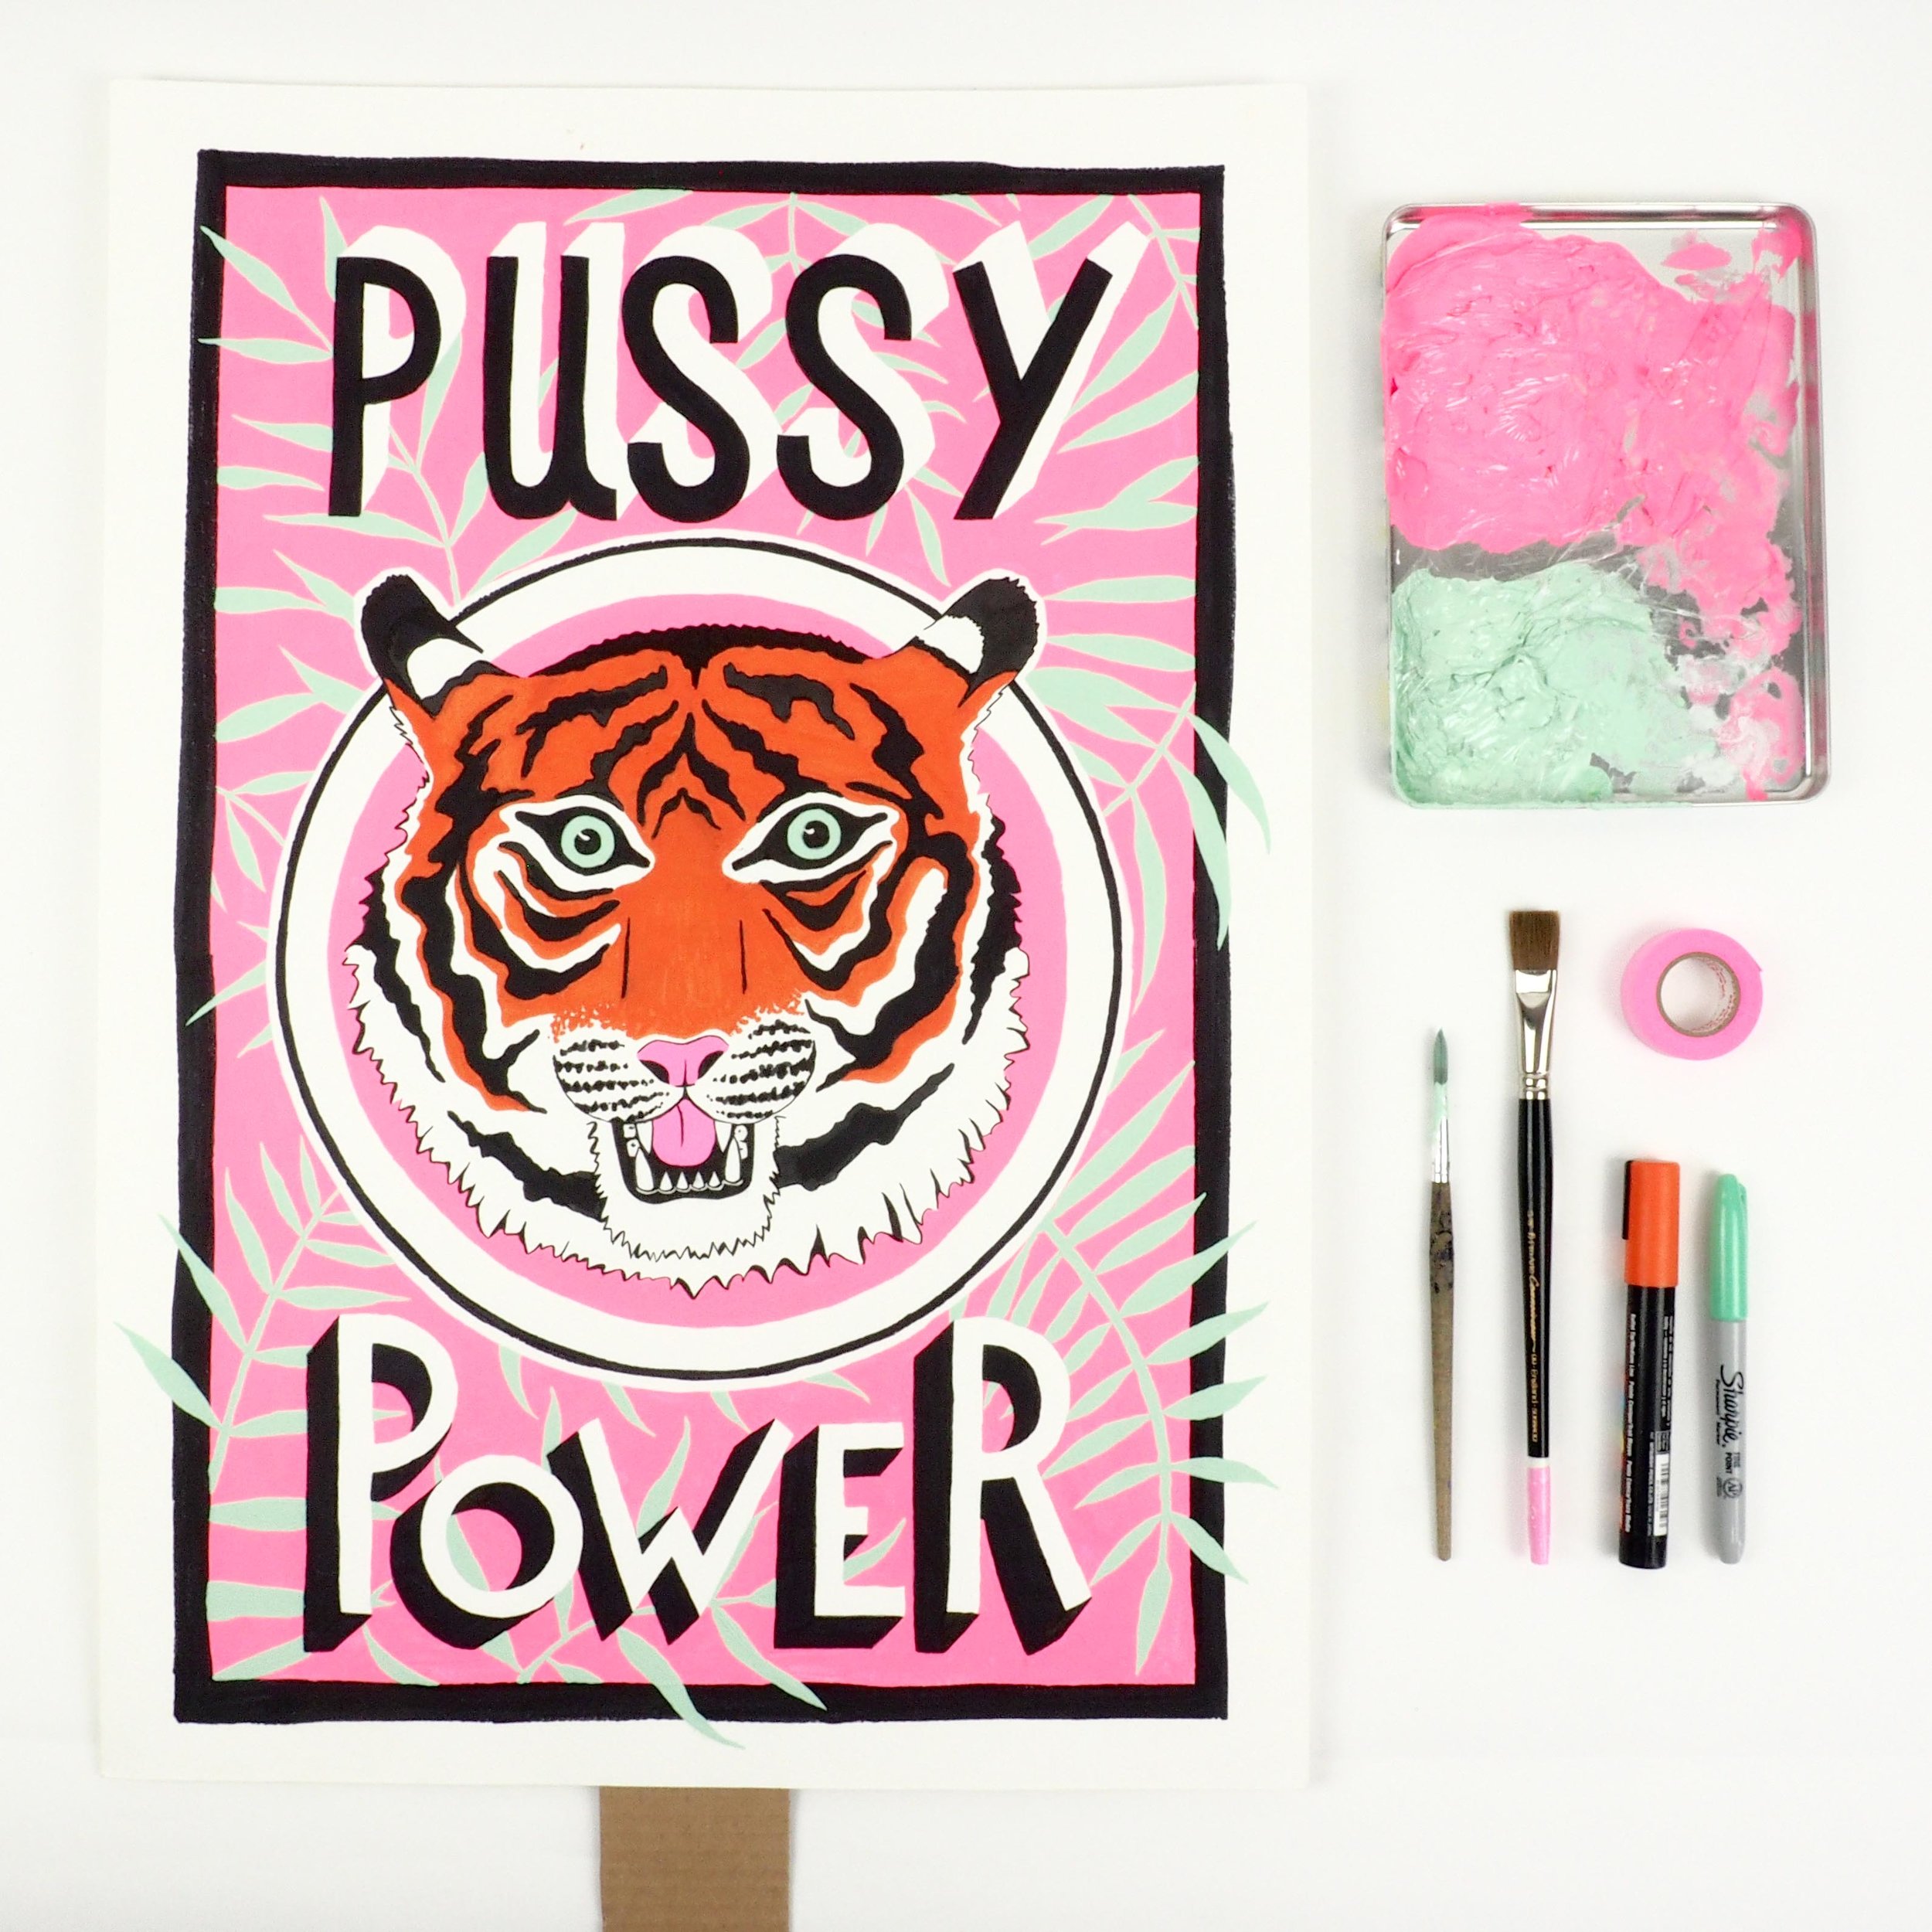 Pussy-power-protest-poster-1.jpg